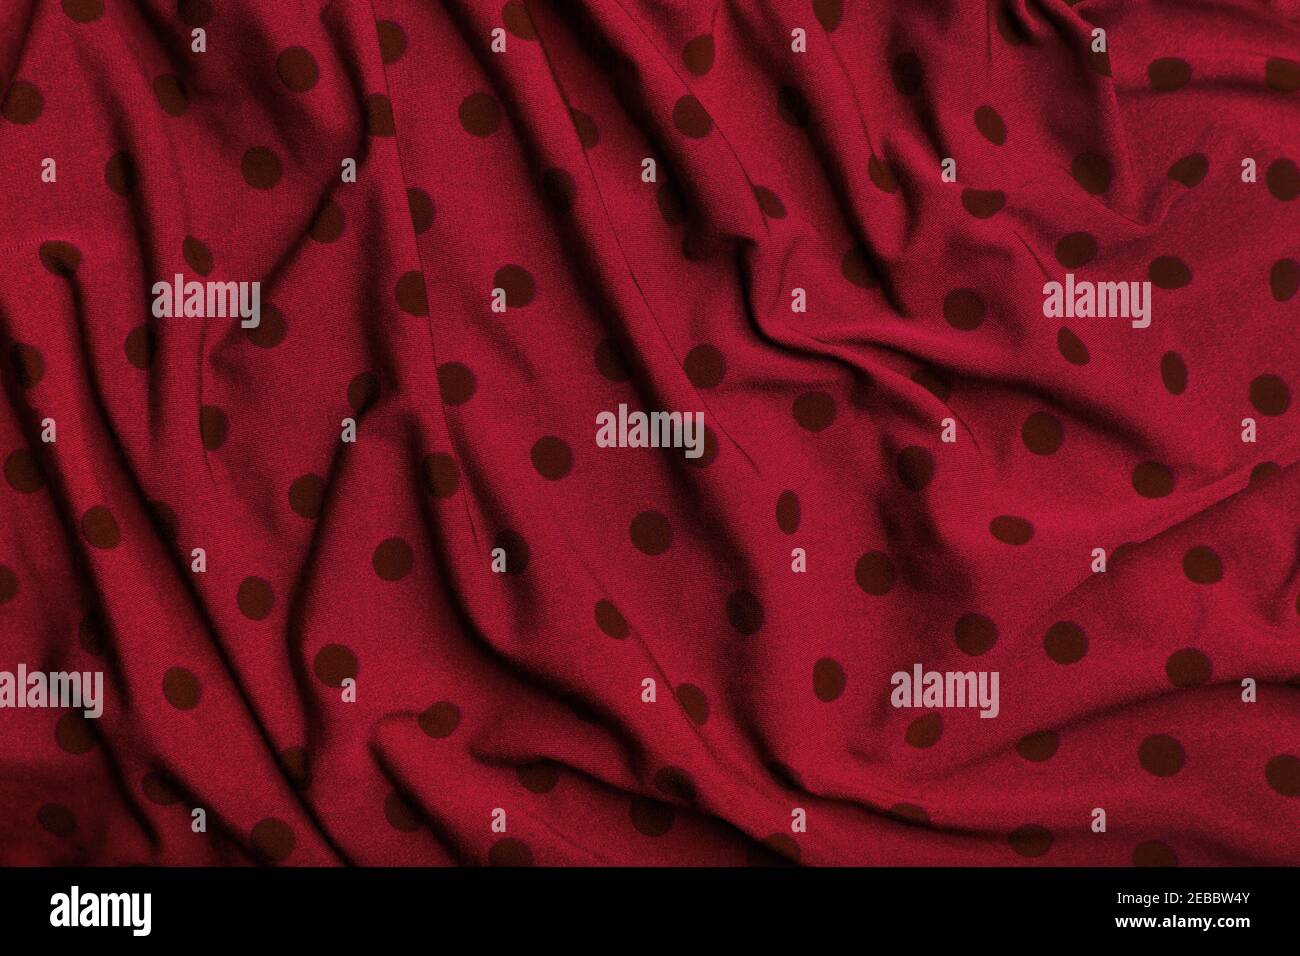 Polka dot red fabric background Stock Photo